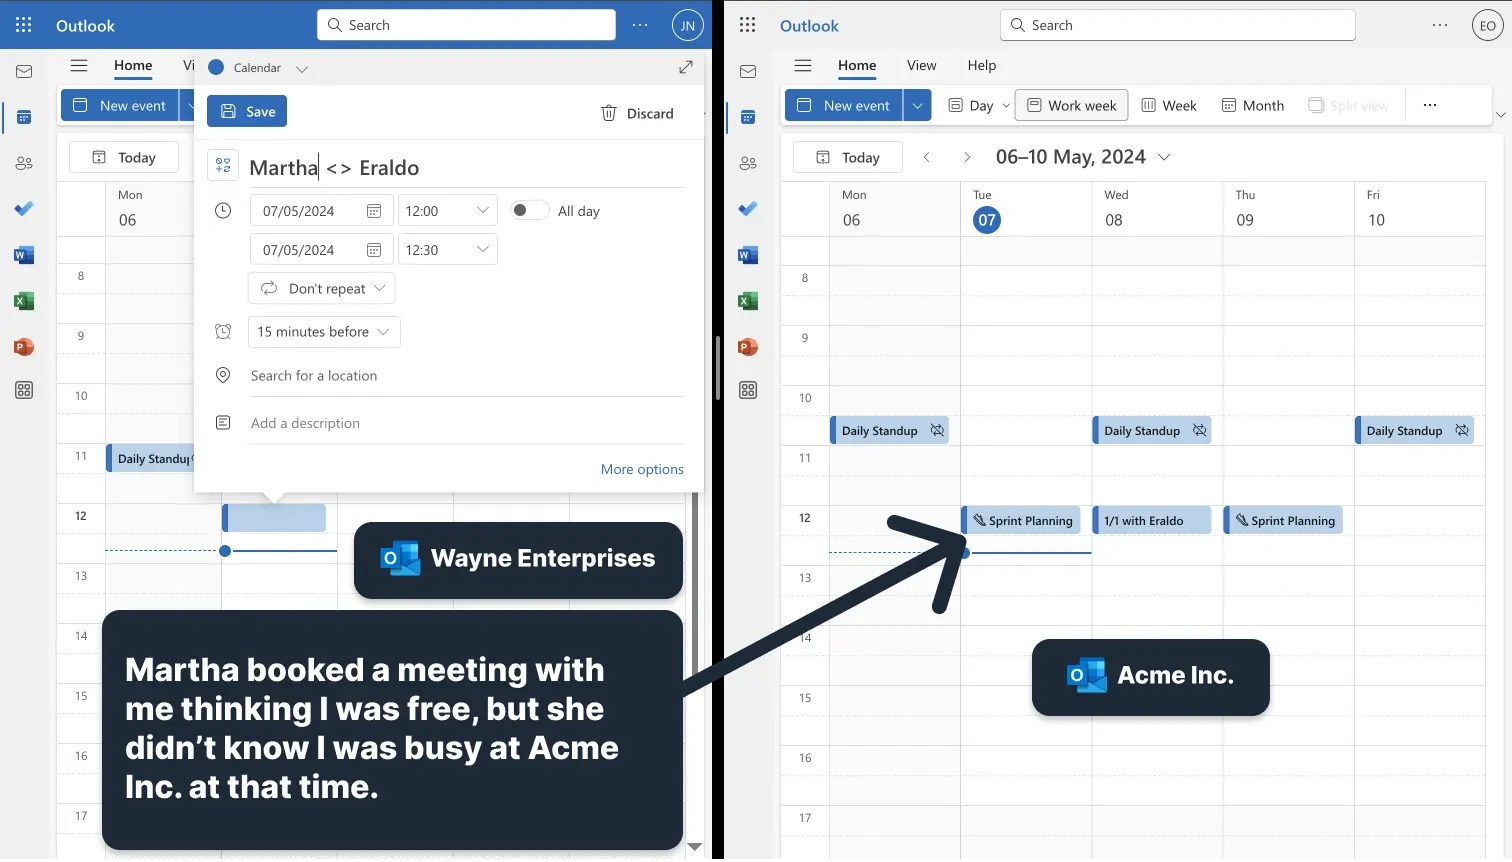 Example of a double booking in Outlook